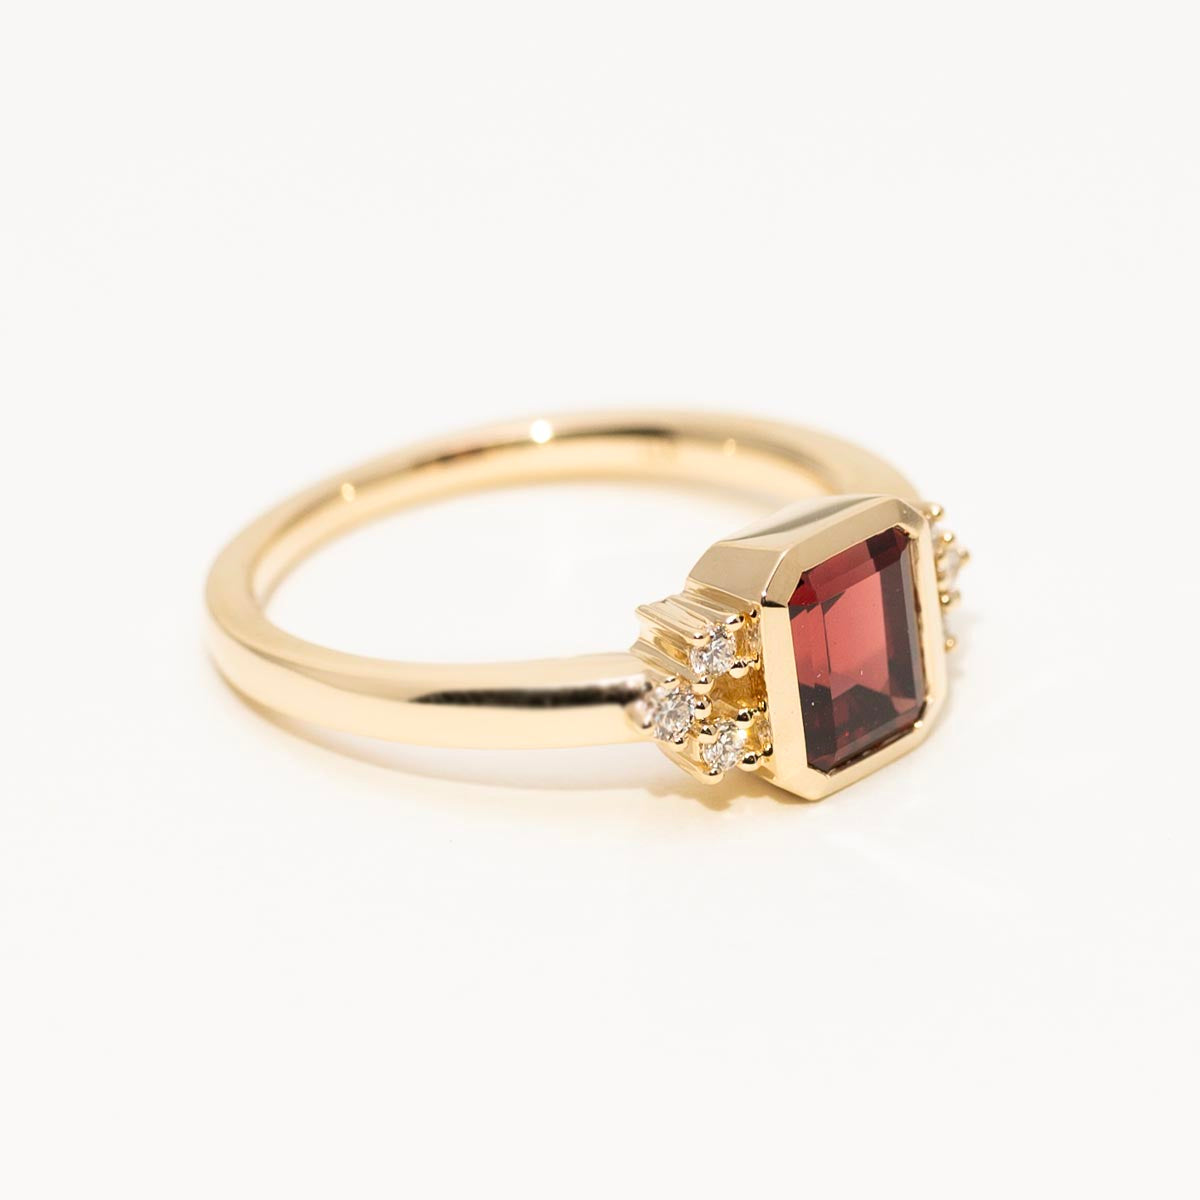 Emerald Cut Garnet Ring in 14kt Yellow Gold with Diamonds (1/10ct tw)